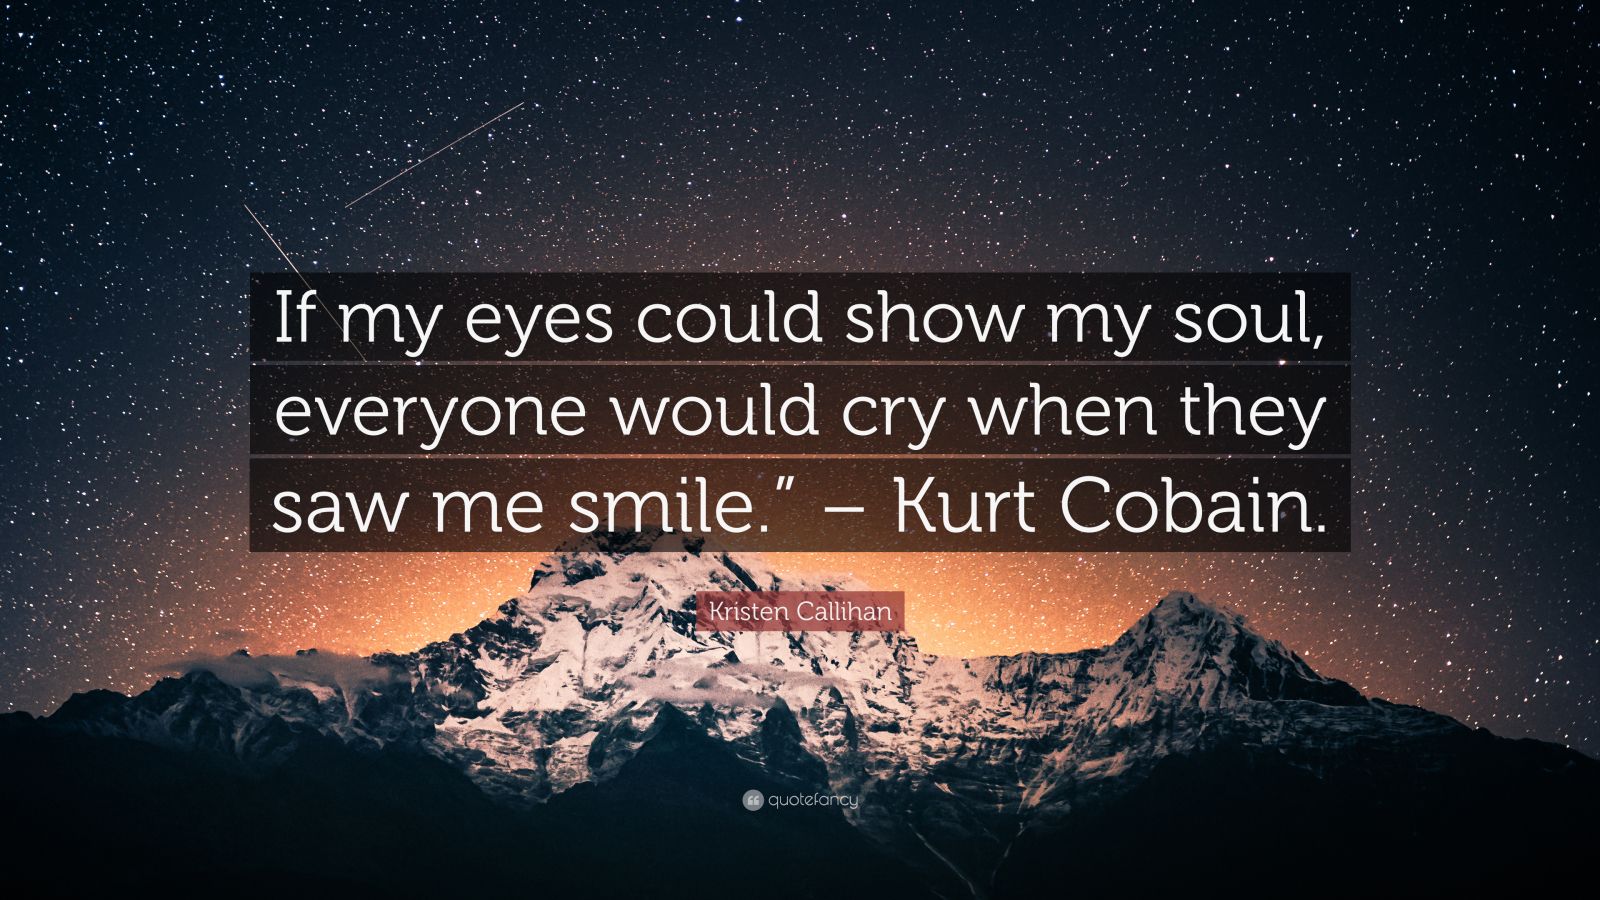 “If my eyes could show my soul, everyone would cry when they saw